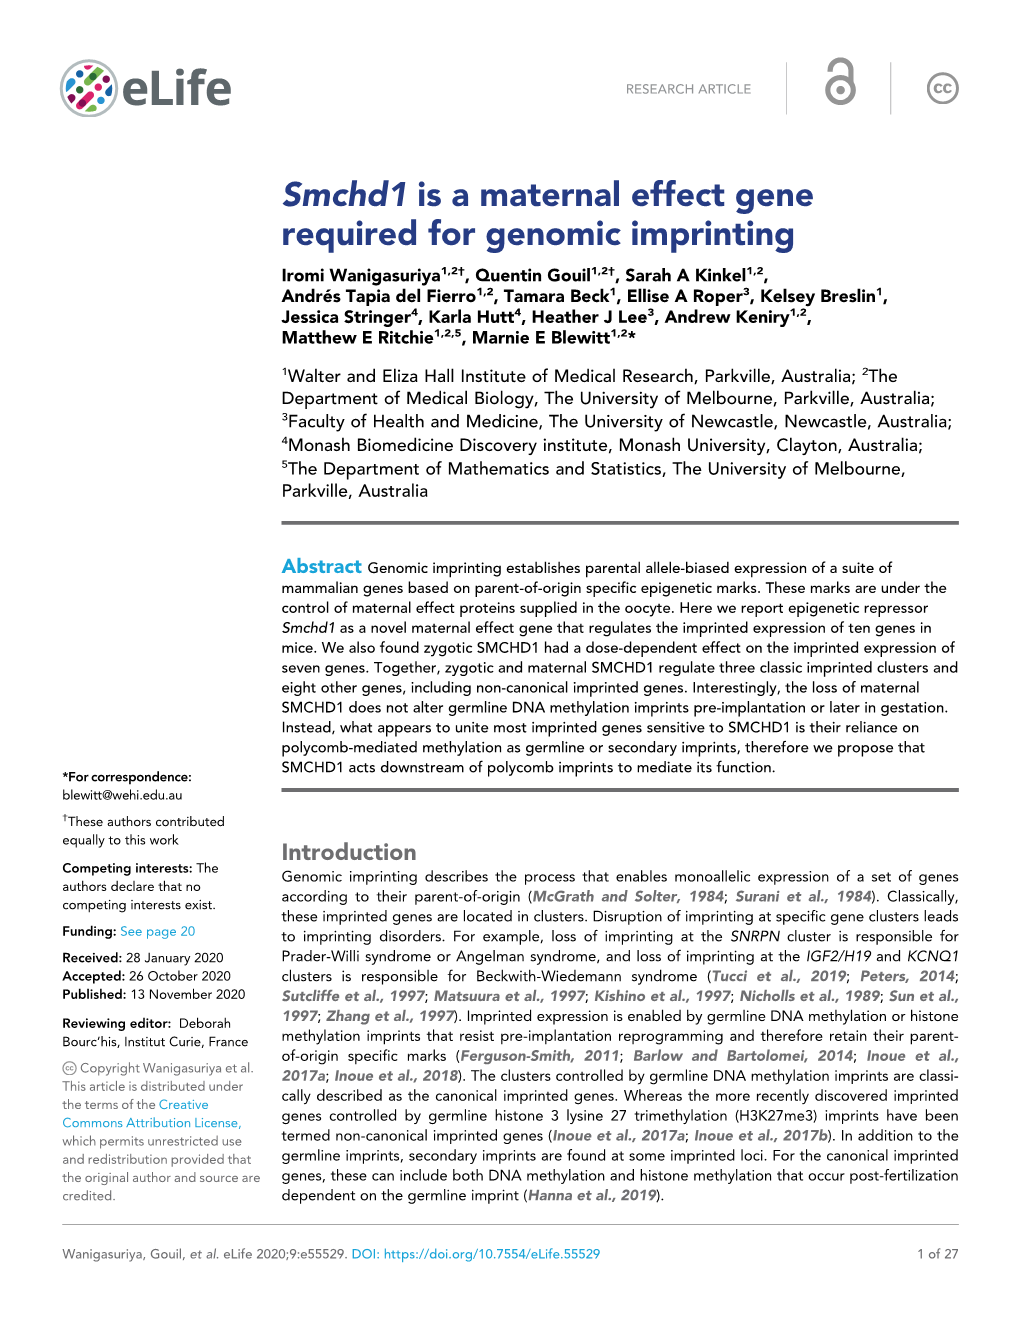 Smchd1 Is a Maternal Effect Gene Required for Genomic Imprinting